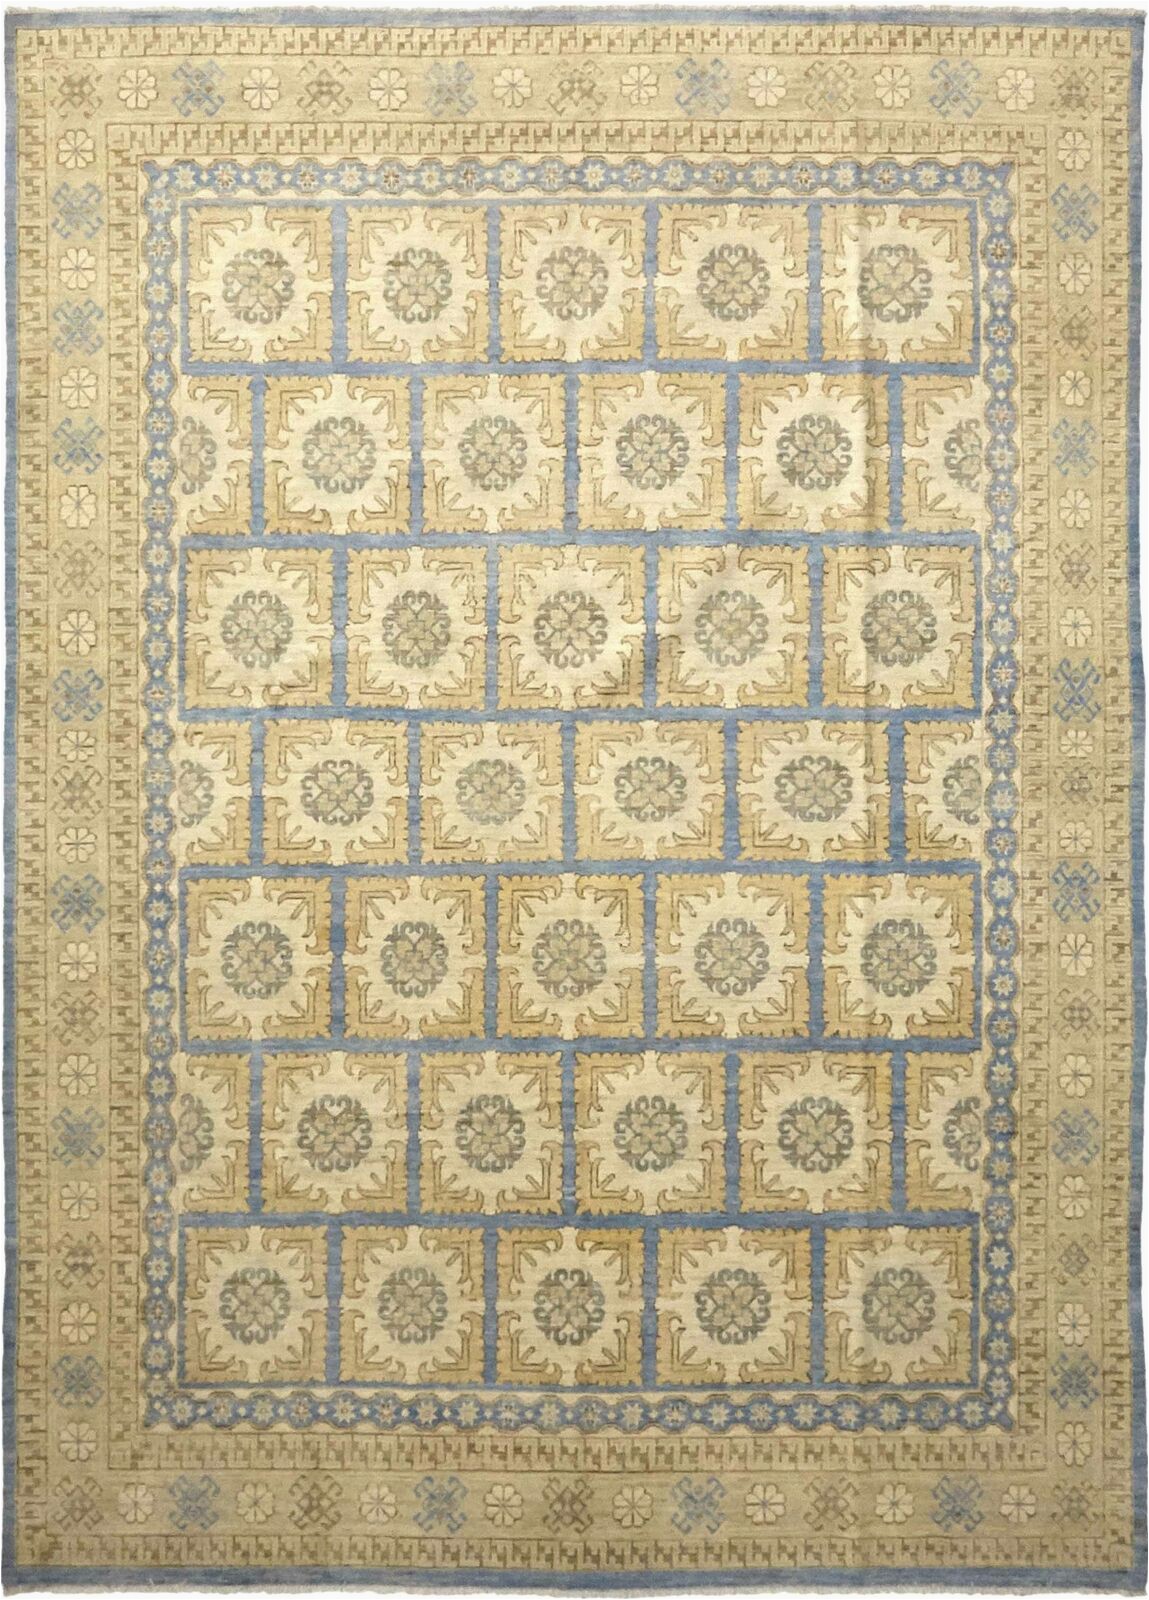 9 Foot Square area Rugs solo Rugs Khotan Hand Knotted area Rug In Hazelnut Wool 9 X 12 Ft